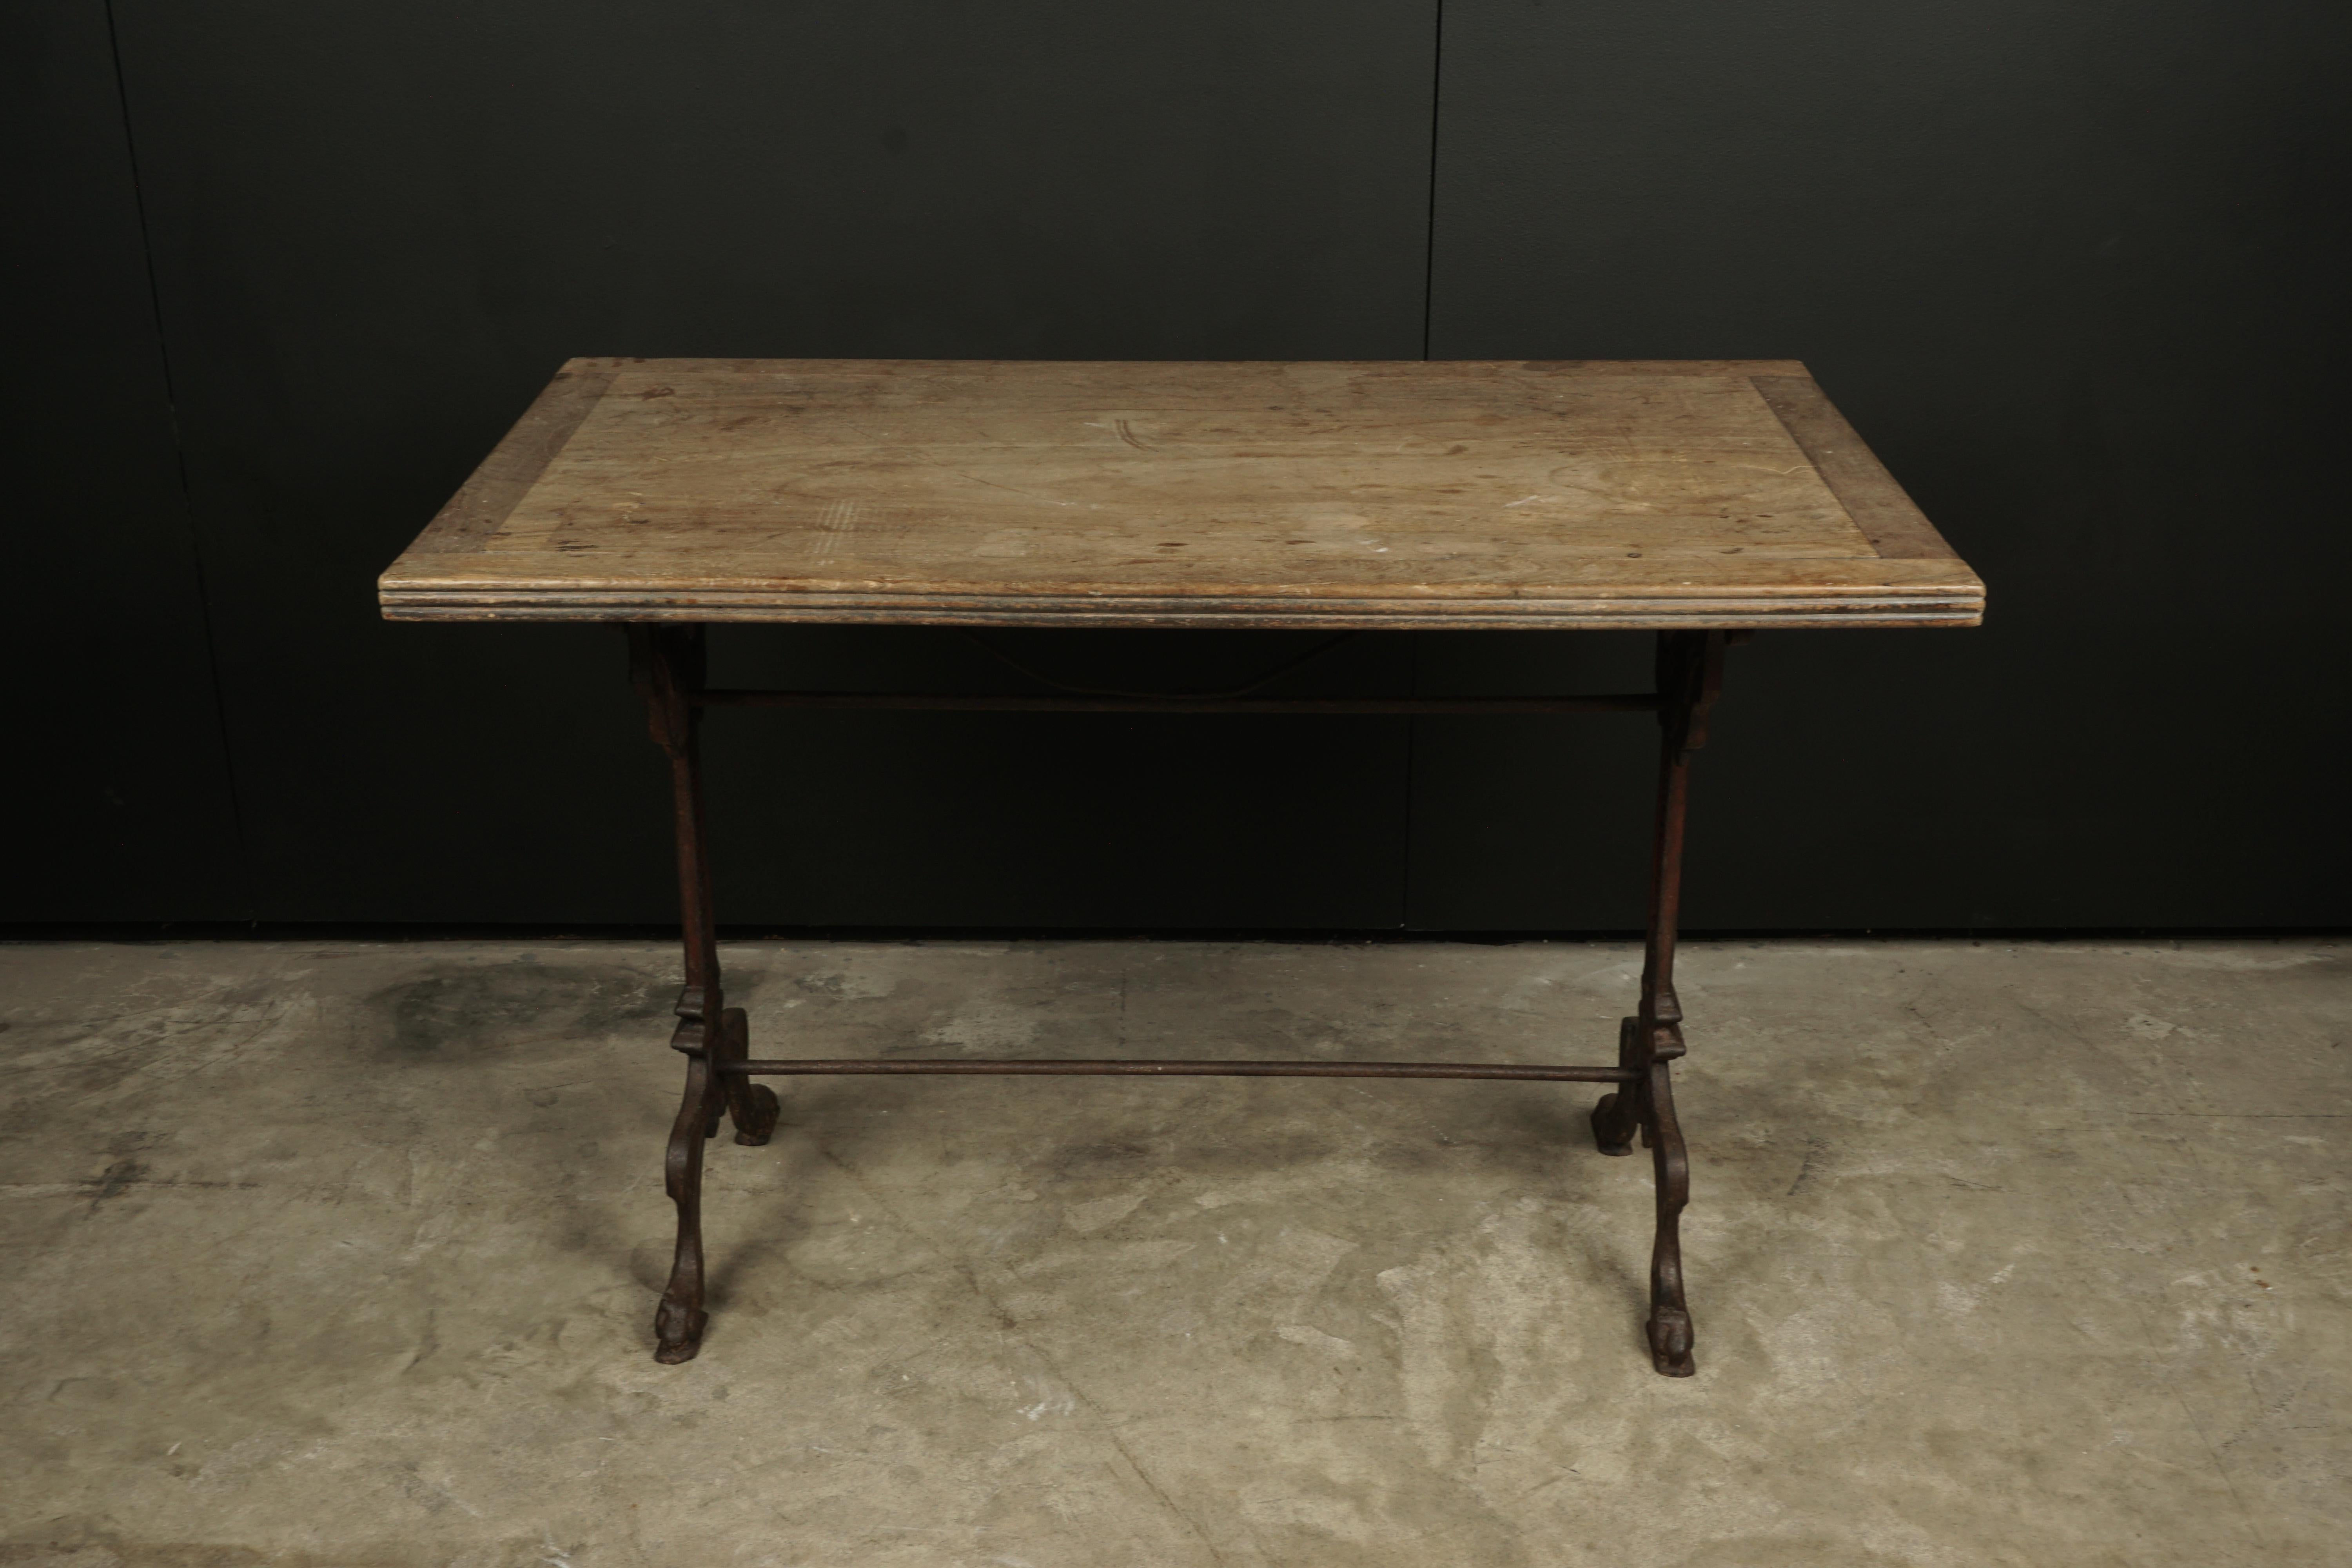 Vintage walnut Bistro table from France, 1950s. Solid walnut top with an iron base. Fantastic wear and patina.